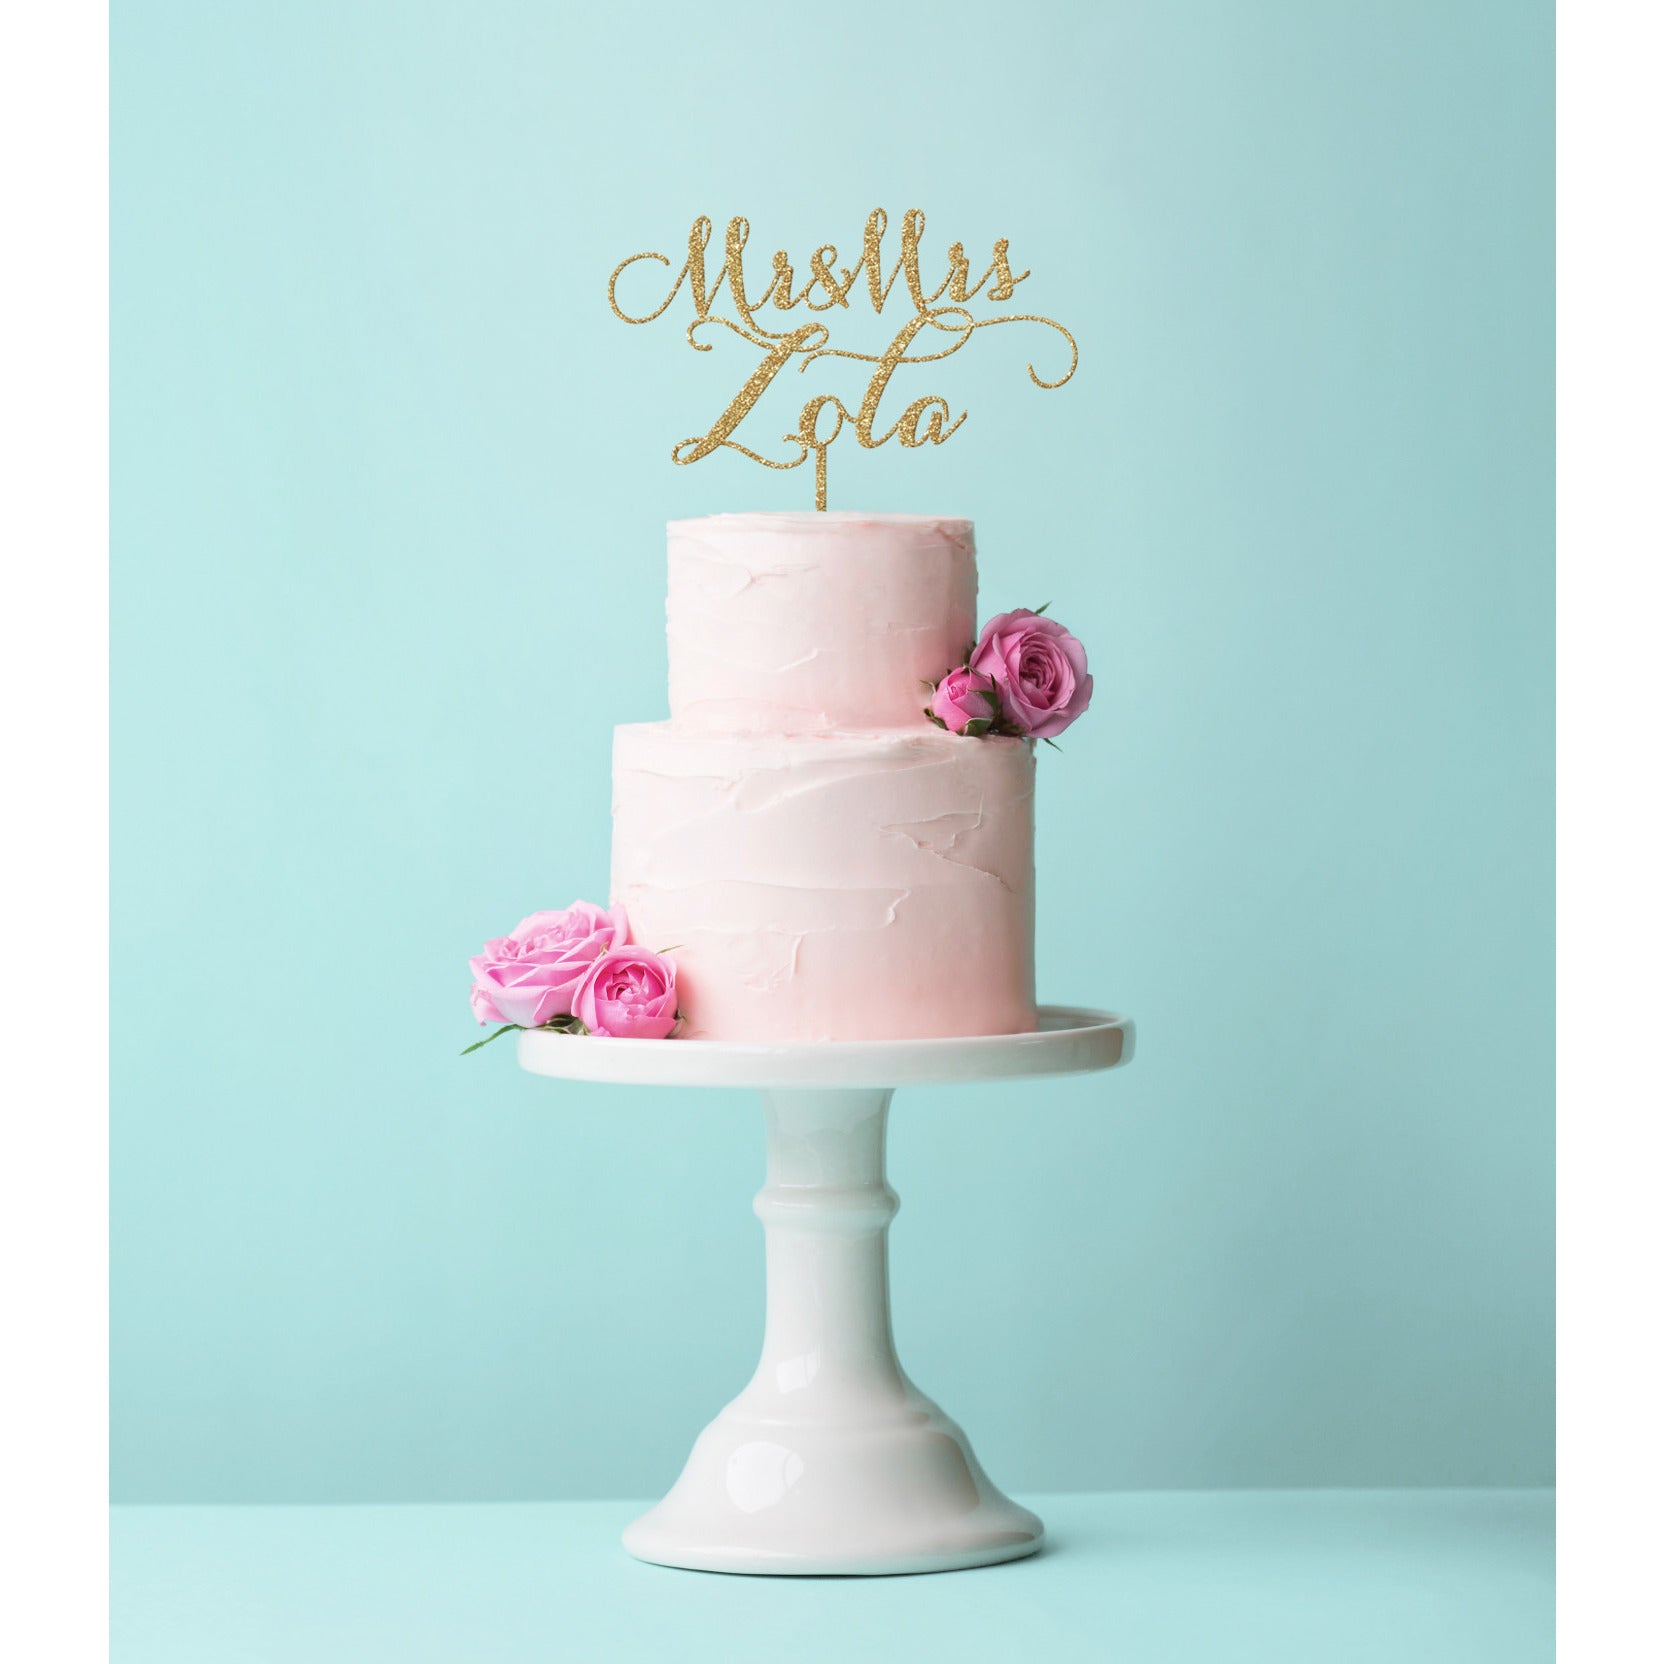 Personalized Wedding Cake Topper - Wedding Decor Gifts